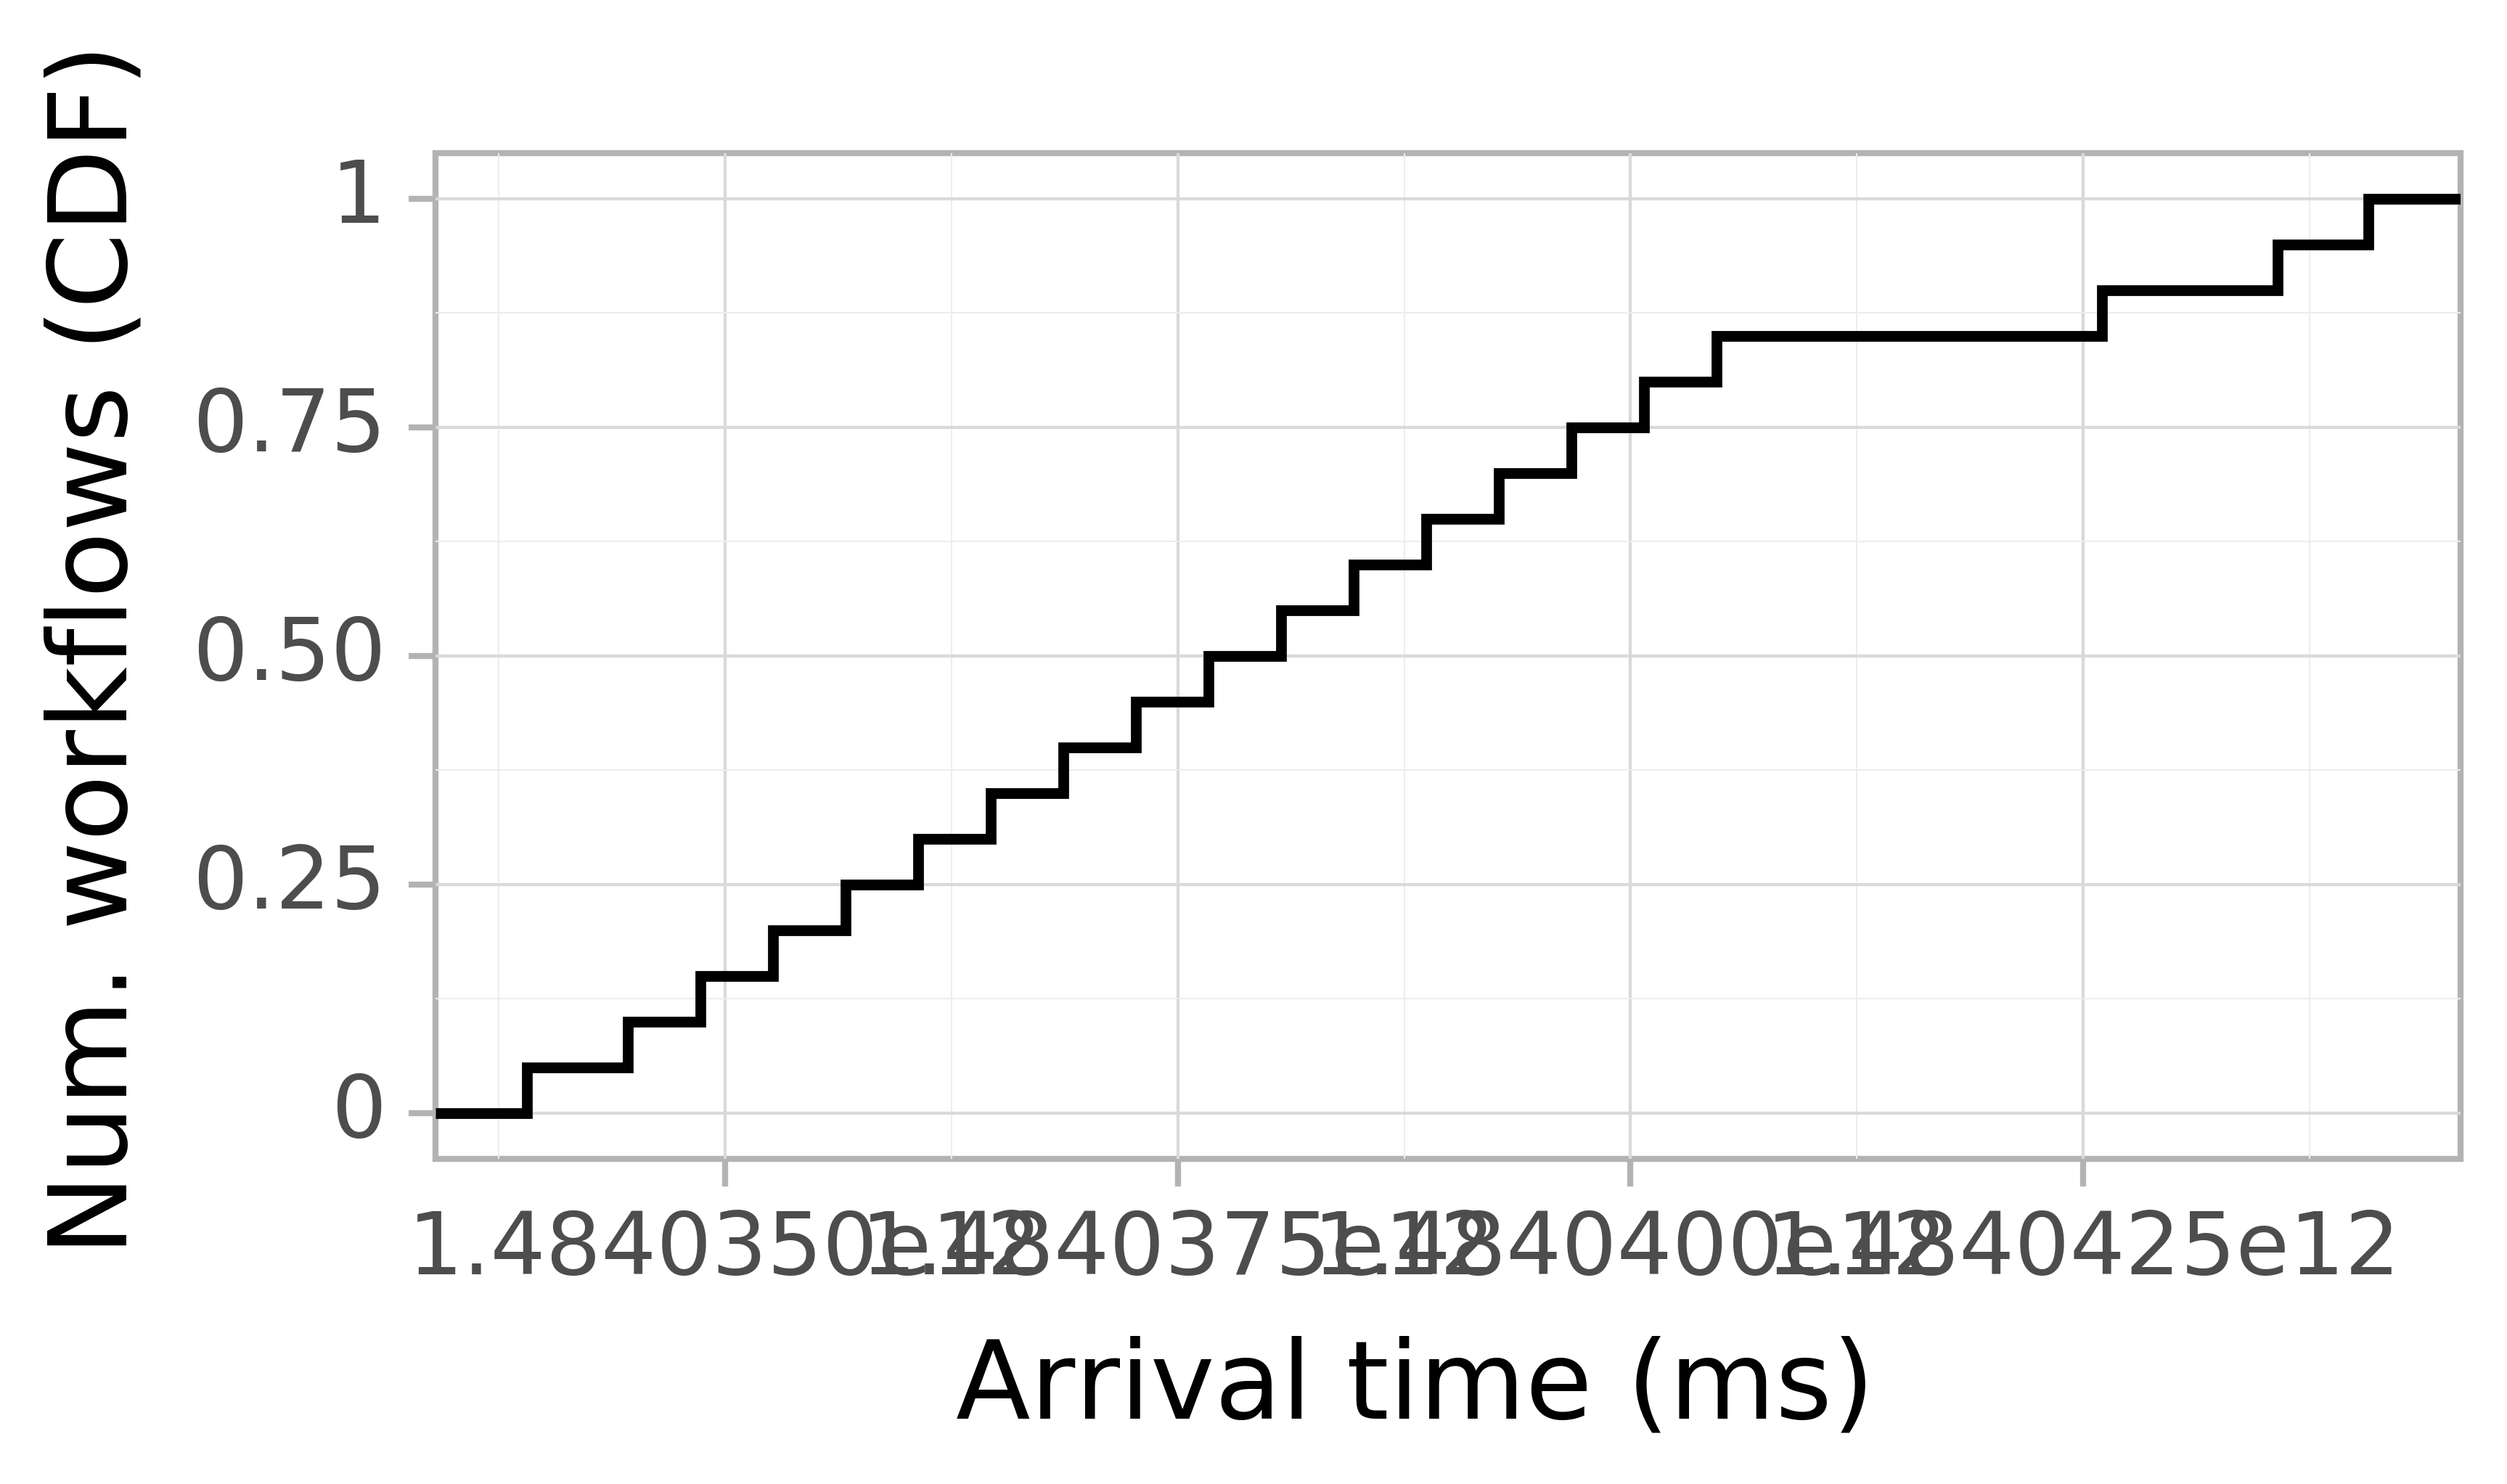 Job arrival CDF graph for the askalon-new_ee17 trace.